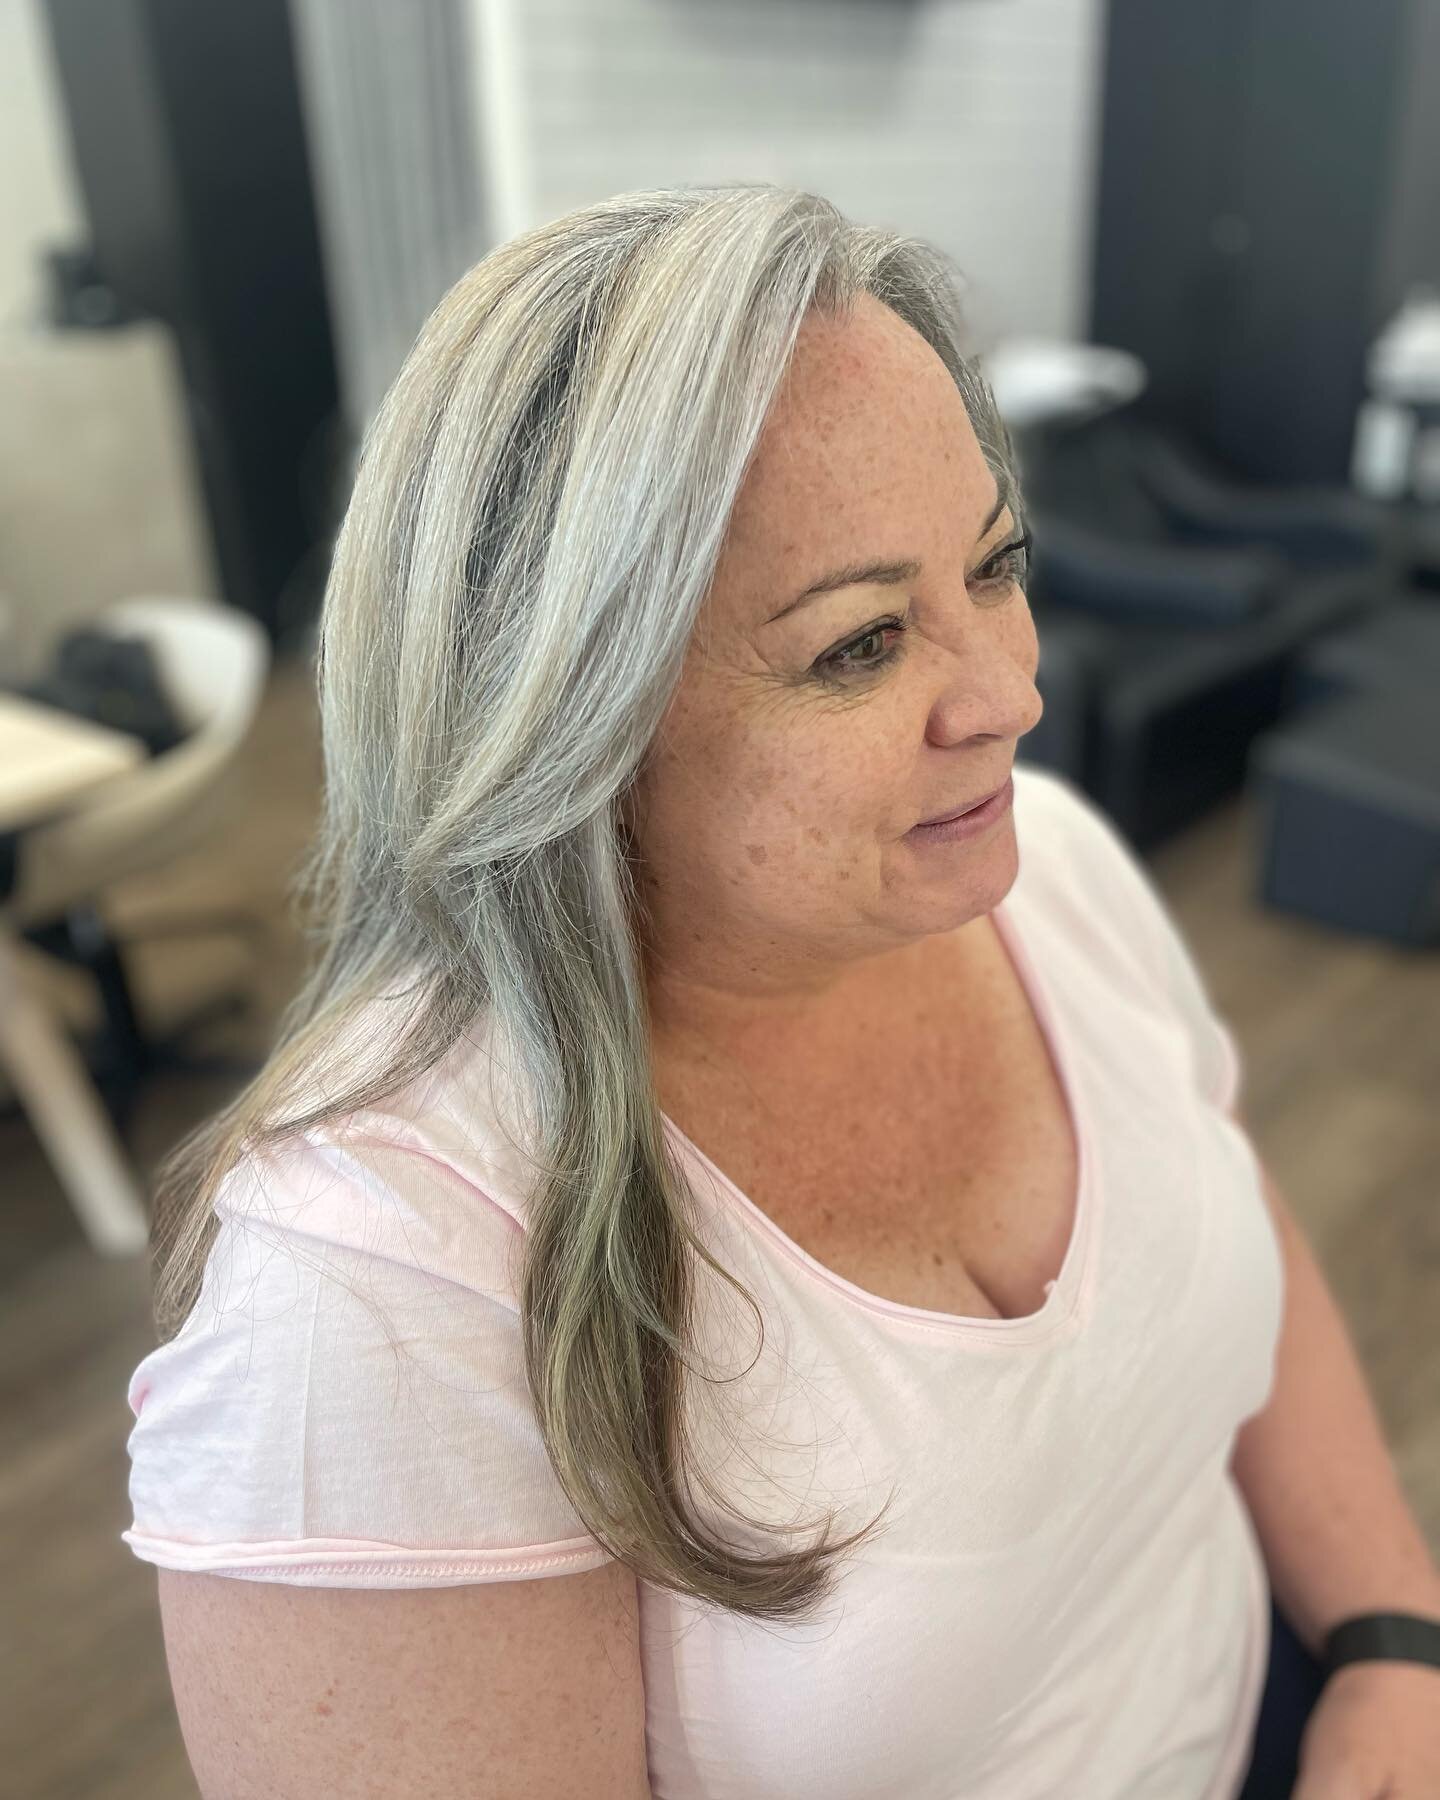 One step closer to the grow out. I&rsquo;ve loved the journey we have been on to embracing our greys. Mon has been a client of mine for over 11 years, we talked about the time she went grey but it was always a very distant future plan. A year ago she